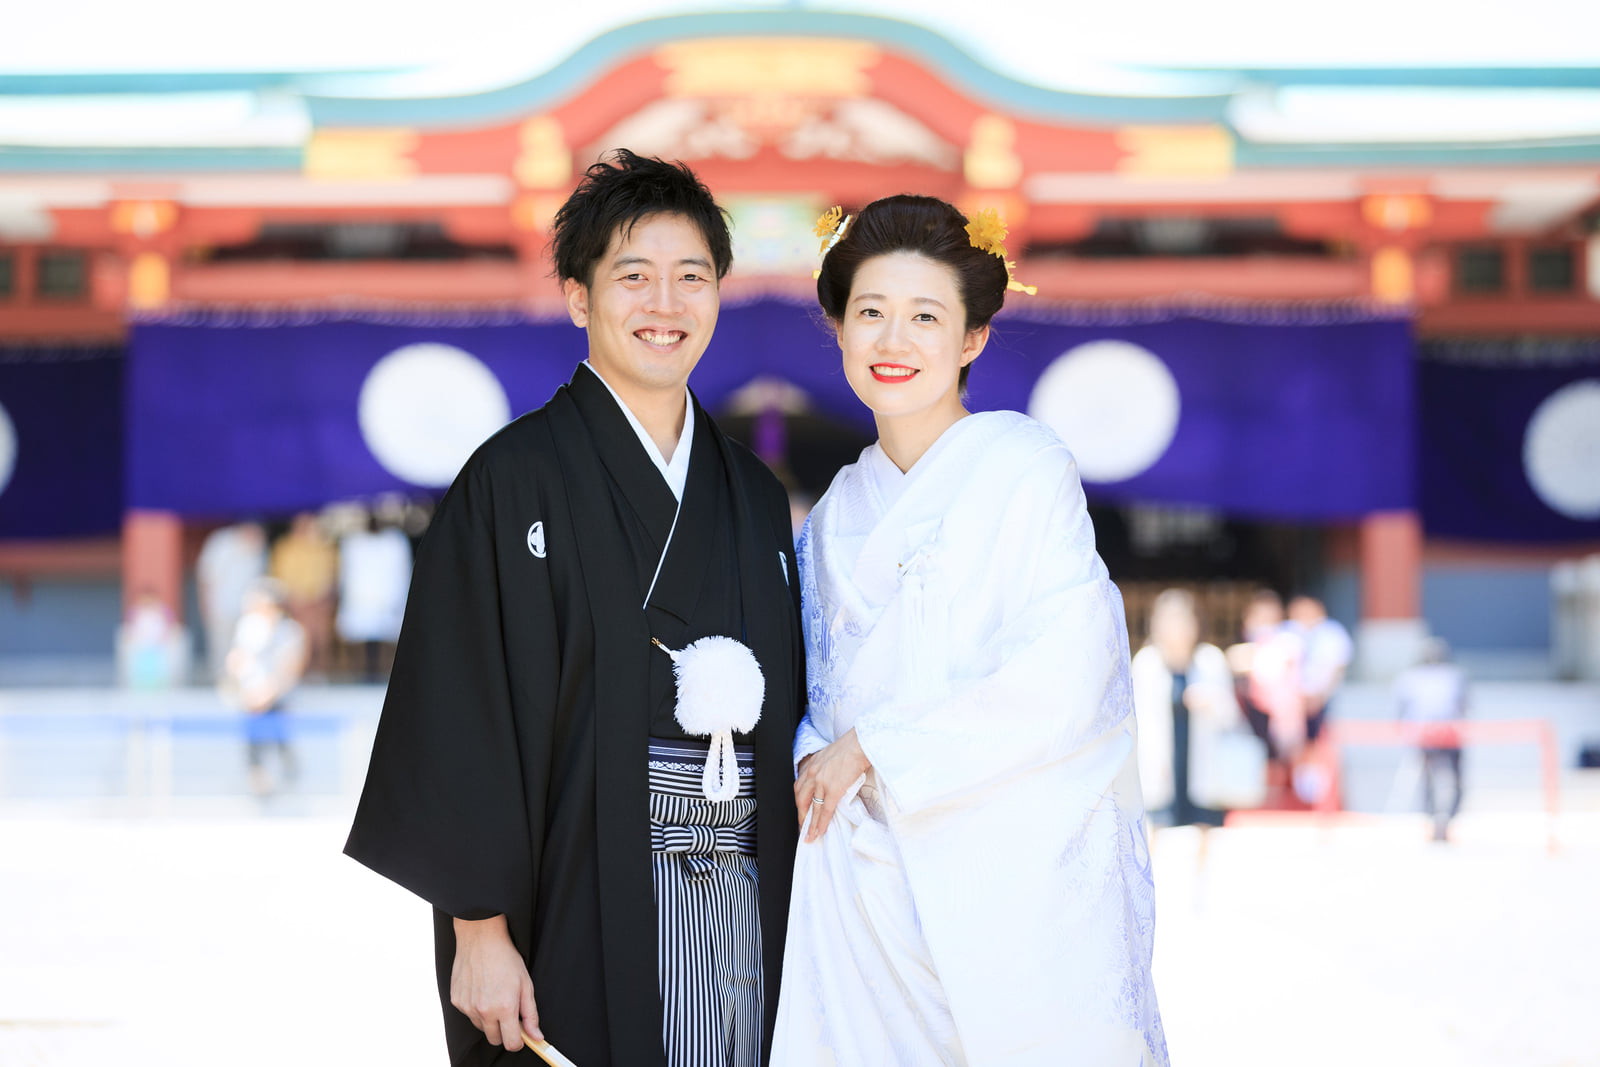 KEN&SACHIE [Kimono & Western-style wedding] An elegant wedding ceremony that you can enjoy at a shrine and a Western-style building